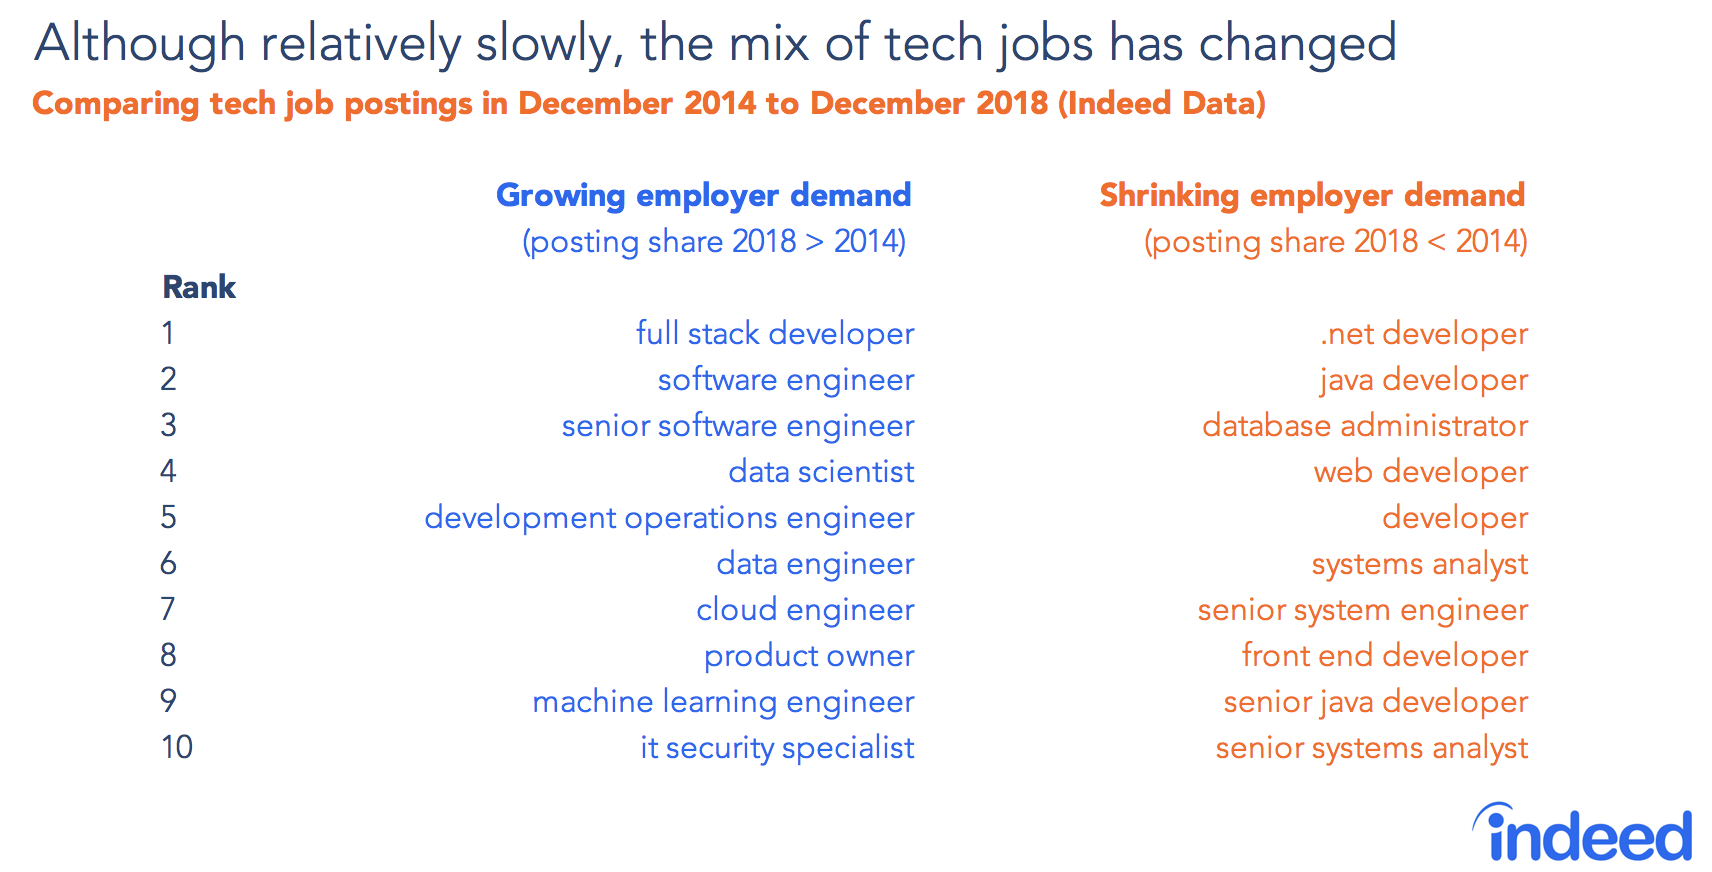 Although relatively slow, the mix of tech jobs has changed